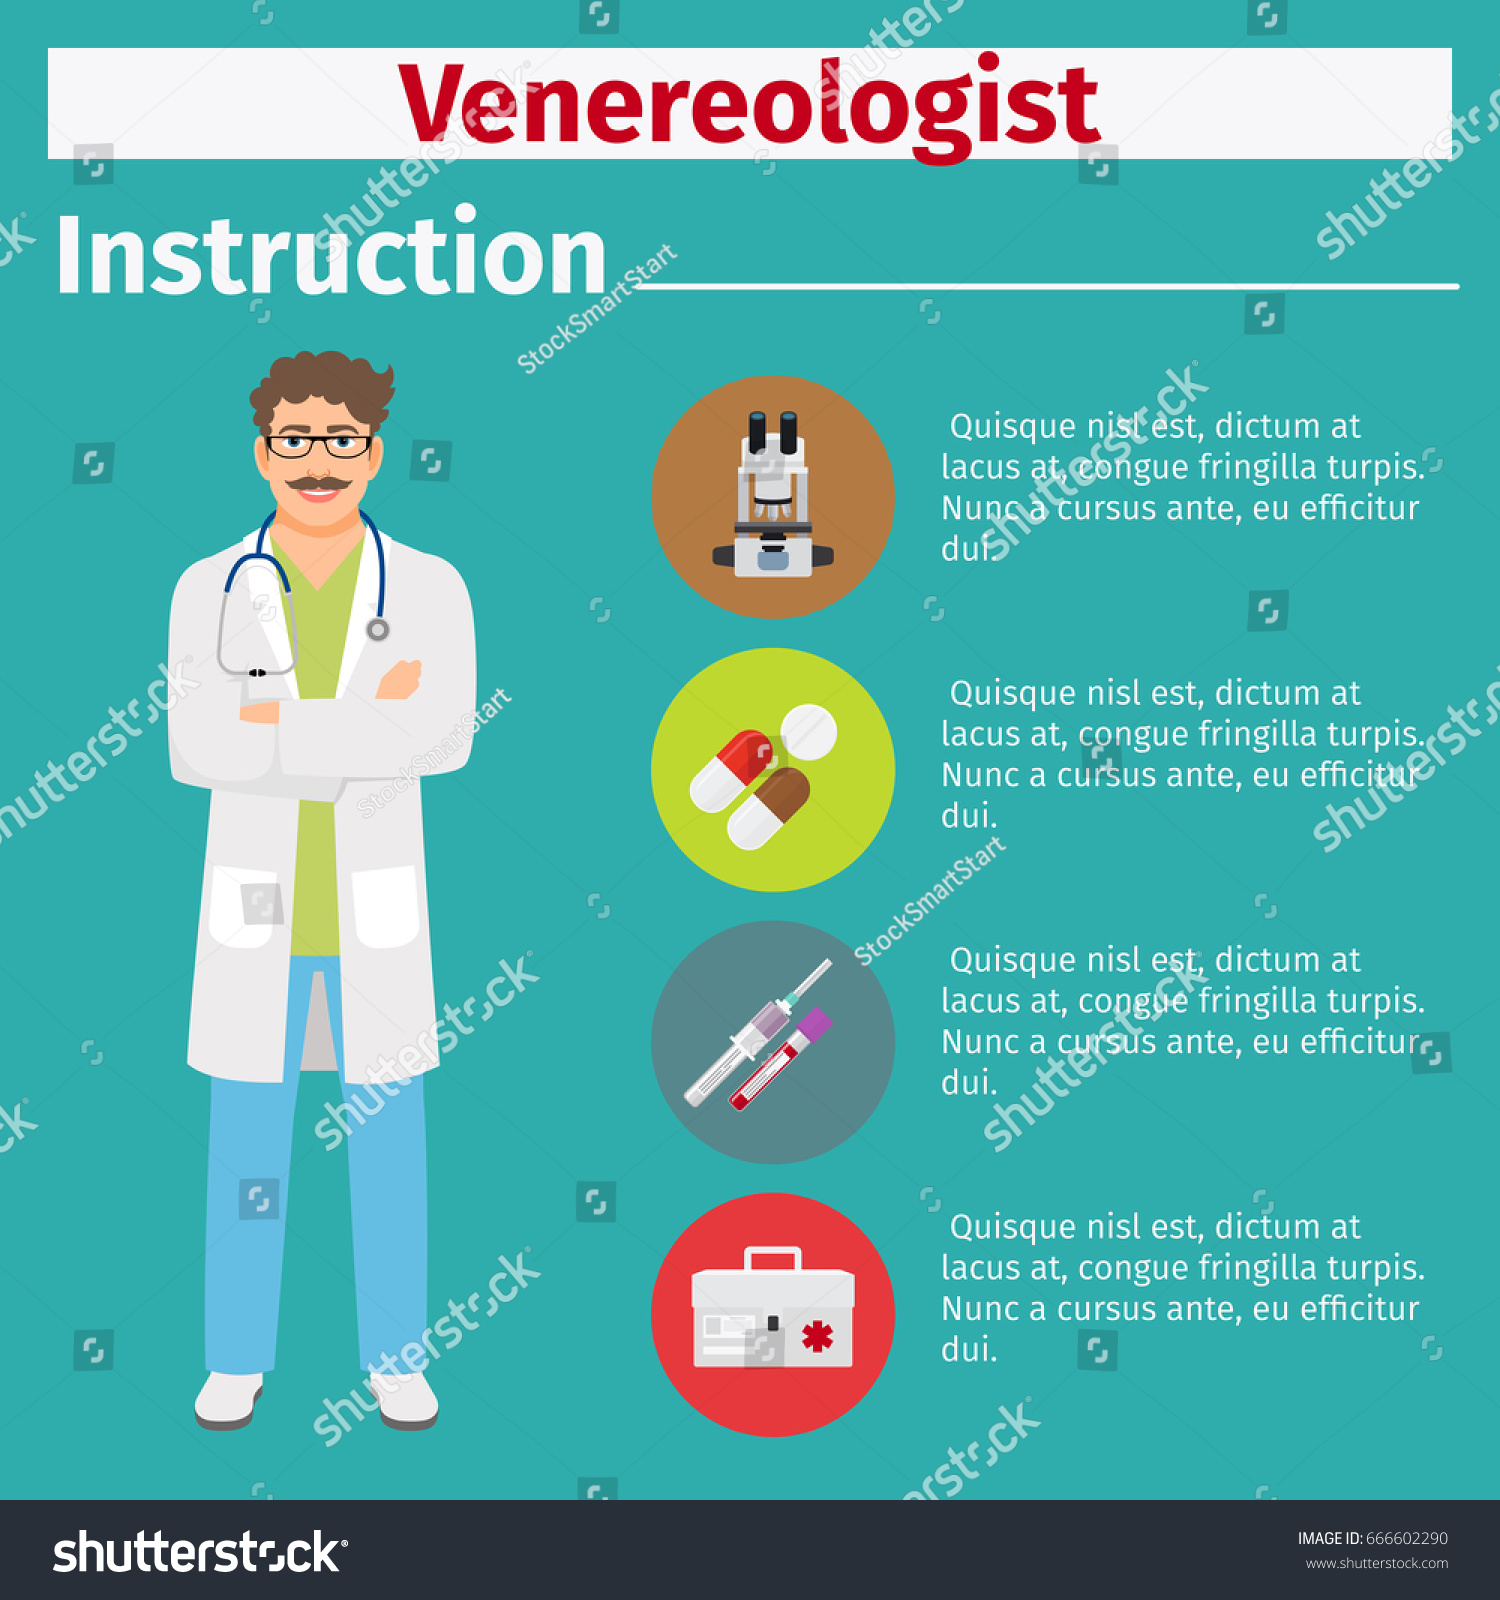 Medical equipment instruction manuals with icons for venereologist. Vector illustration #666602290